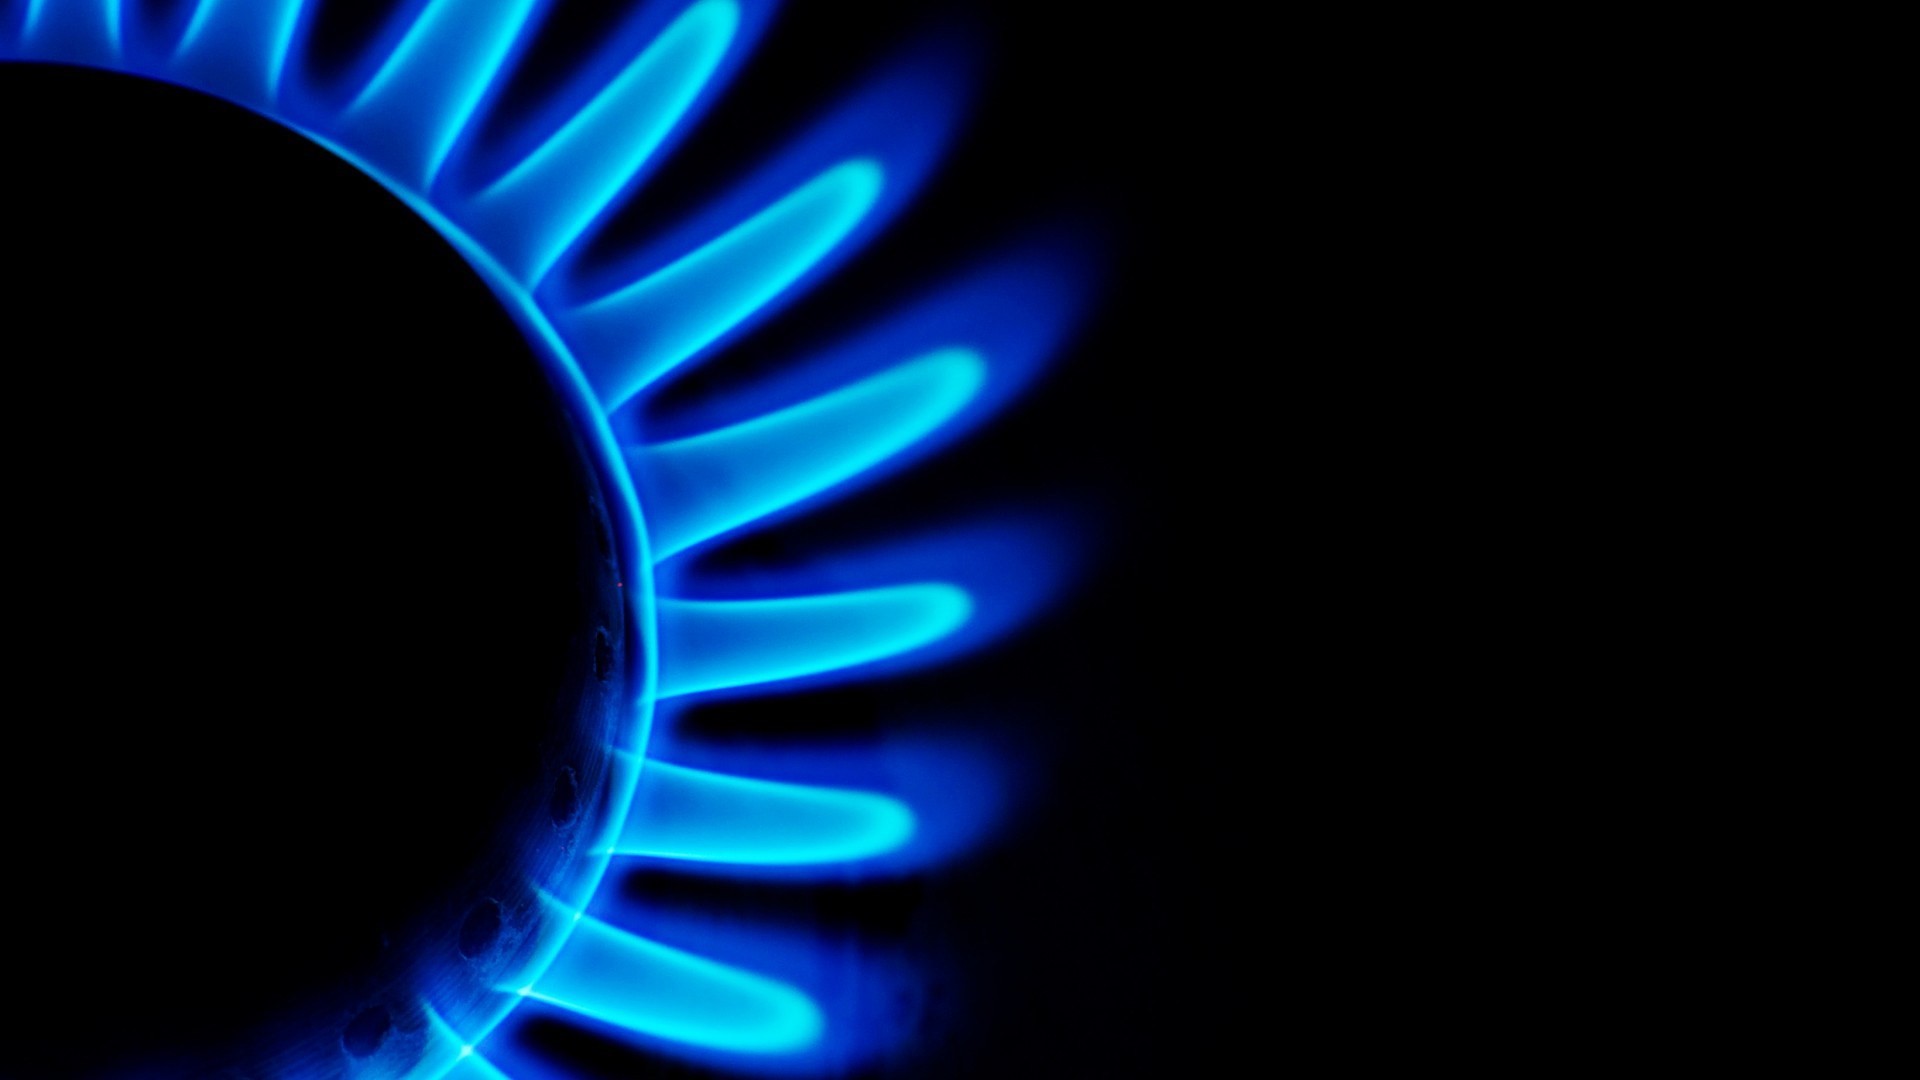 Simple Background Circle Fire Blue Flames Black Background Minimalism Blue Simple Cyan 1920x1080